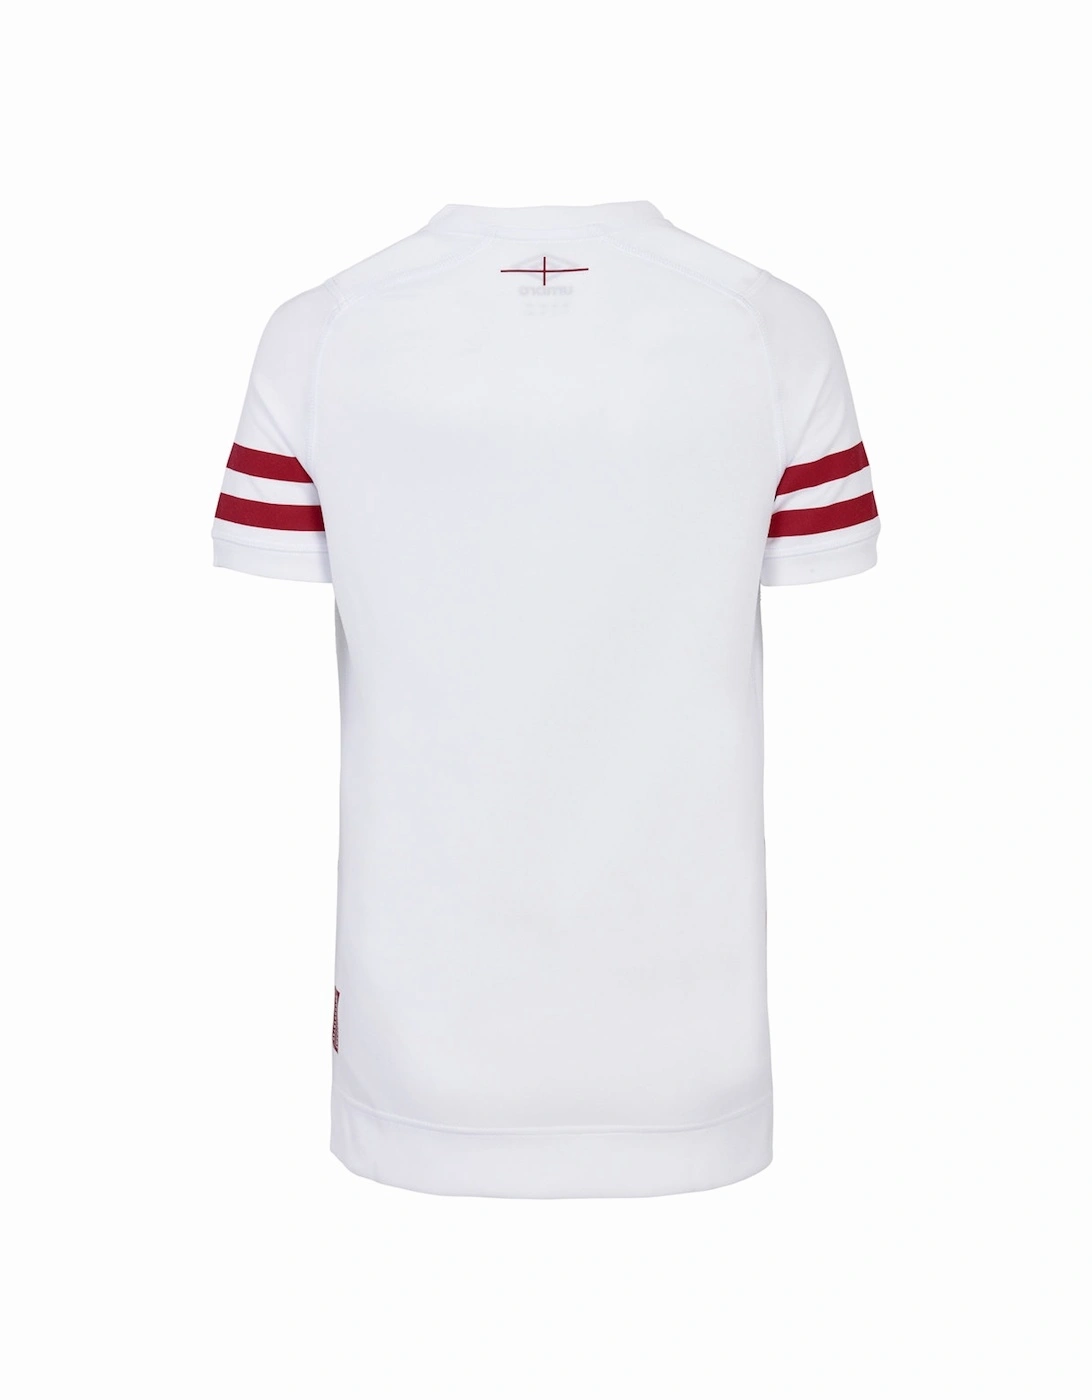 England Rugby Childrens/Kids 22/23 Pro Home Jersey